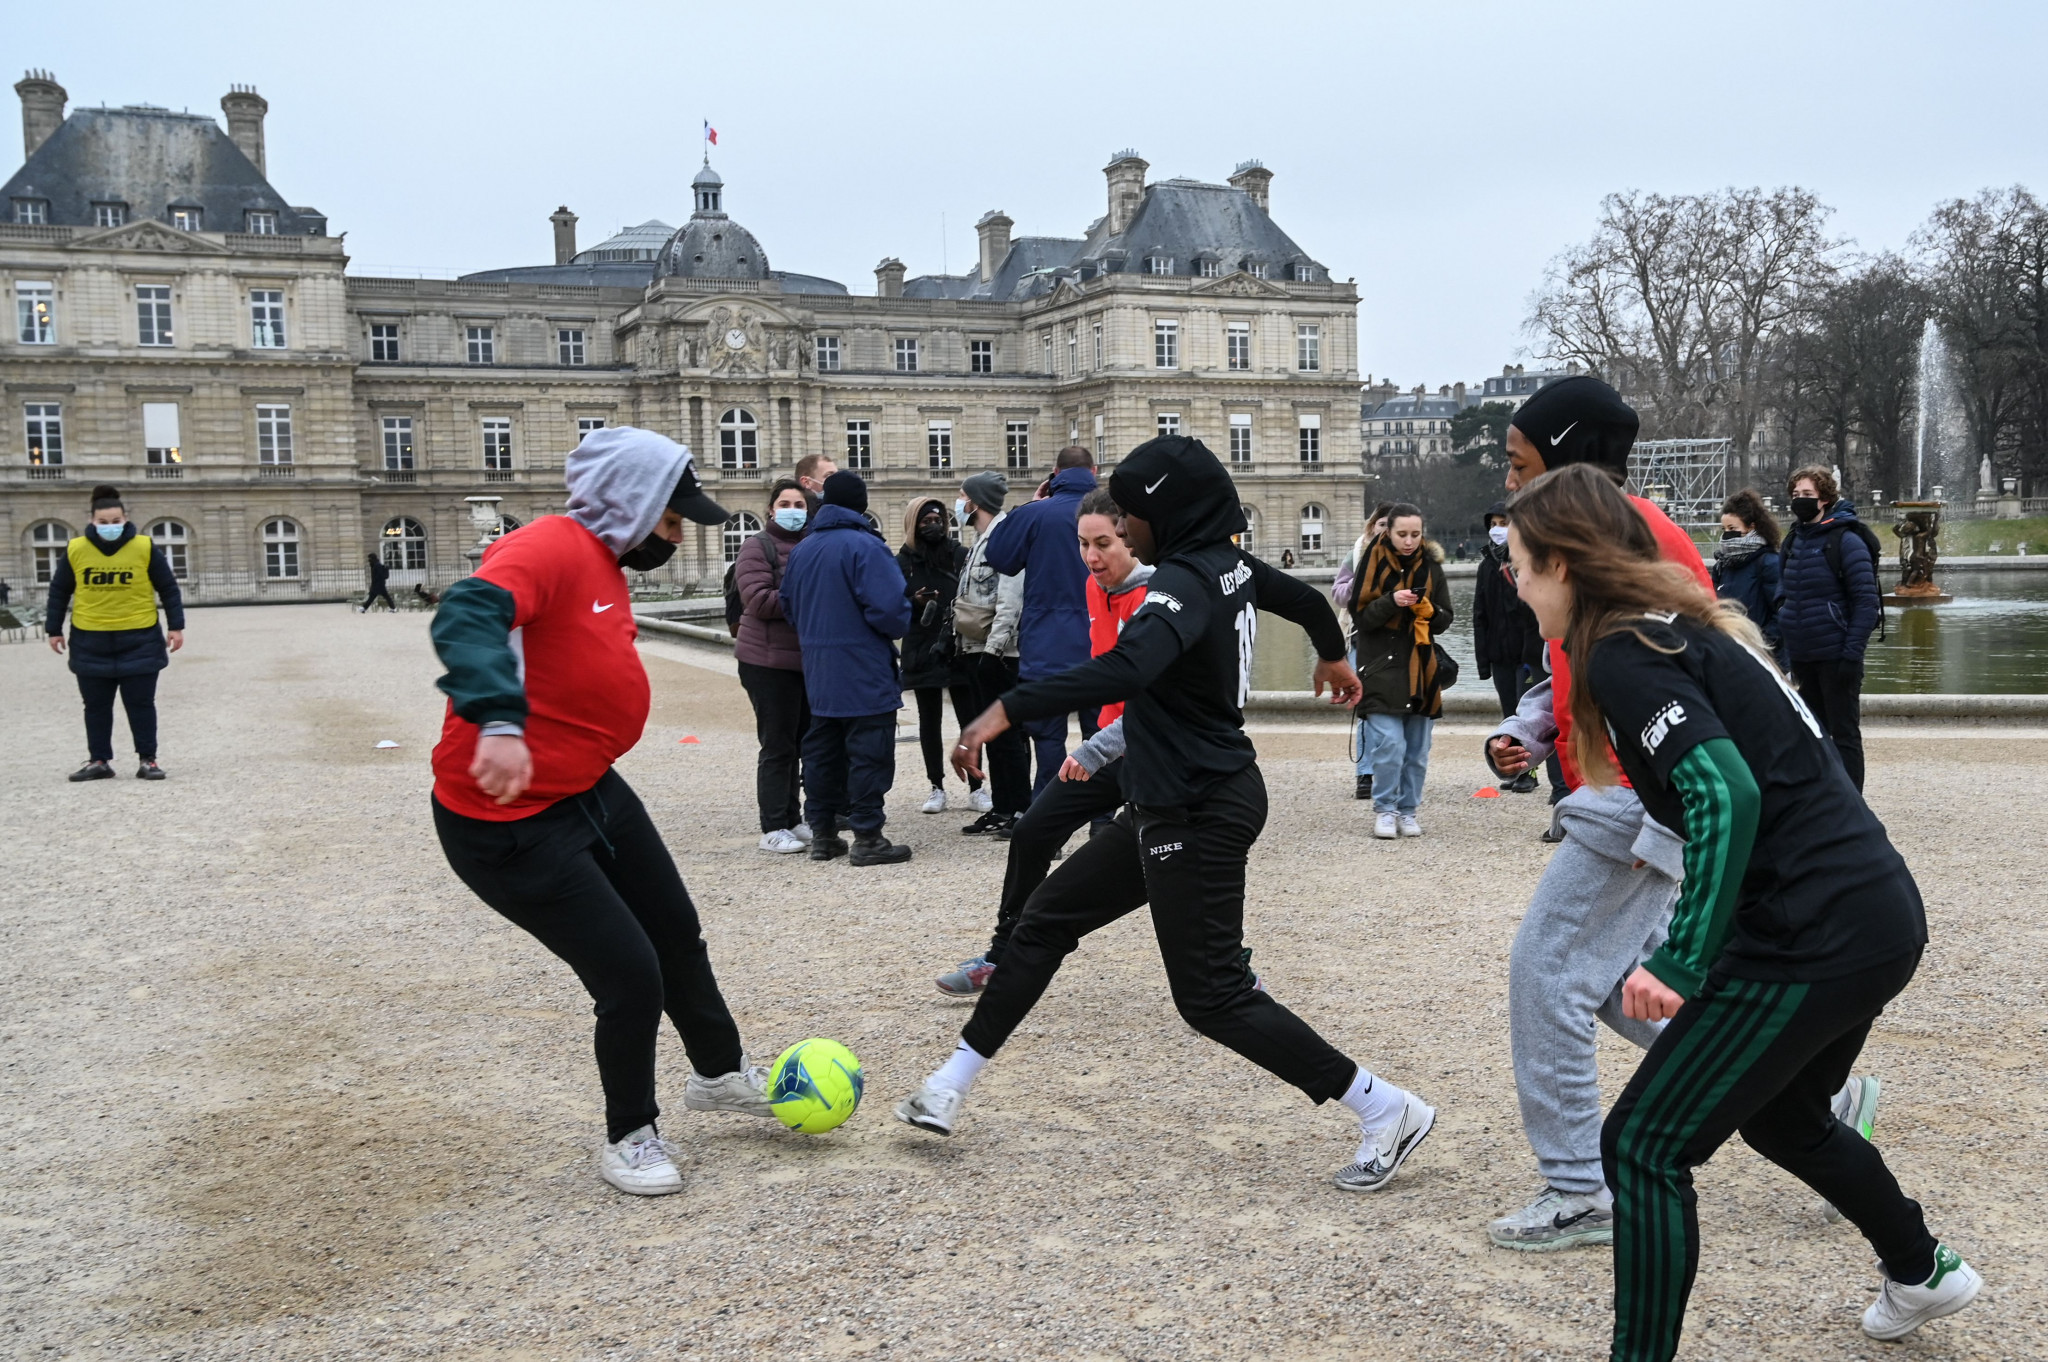 Women wearing the hijab play football in Paris ©Getty Images